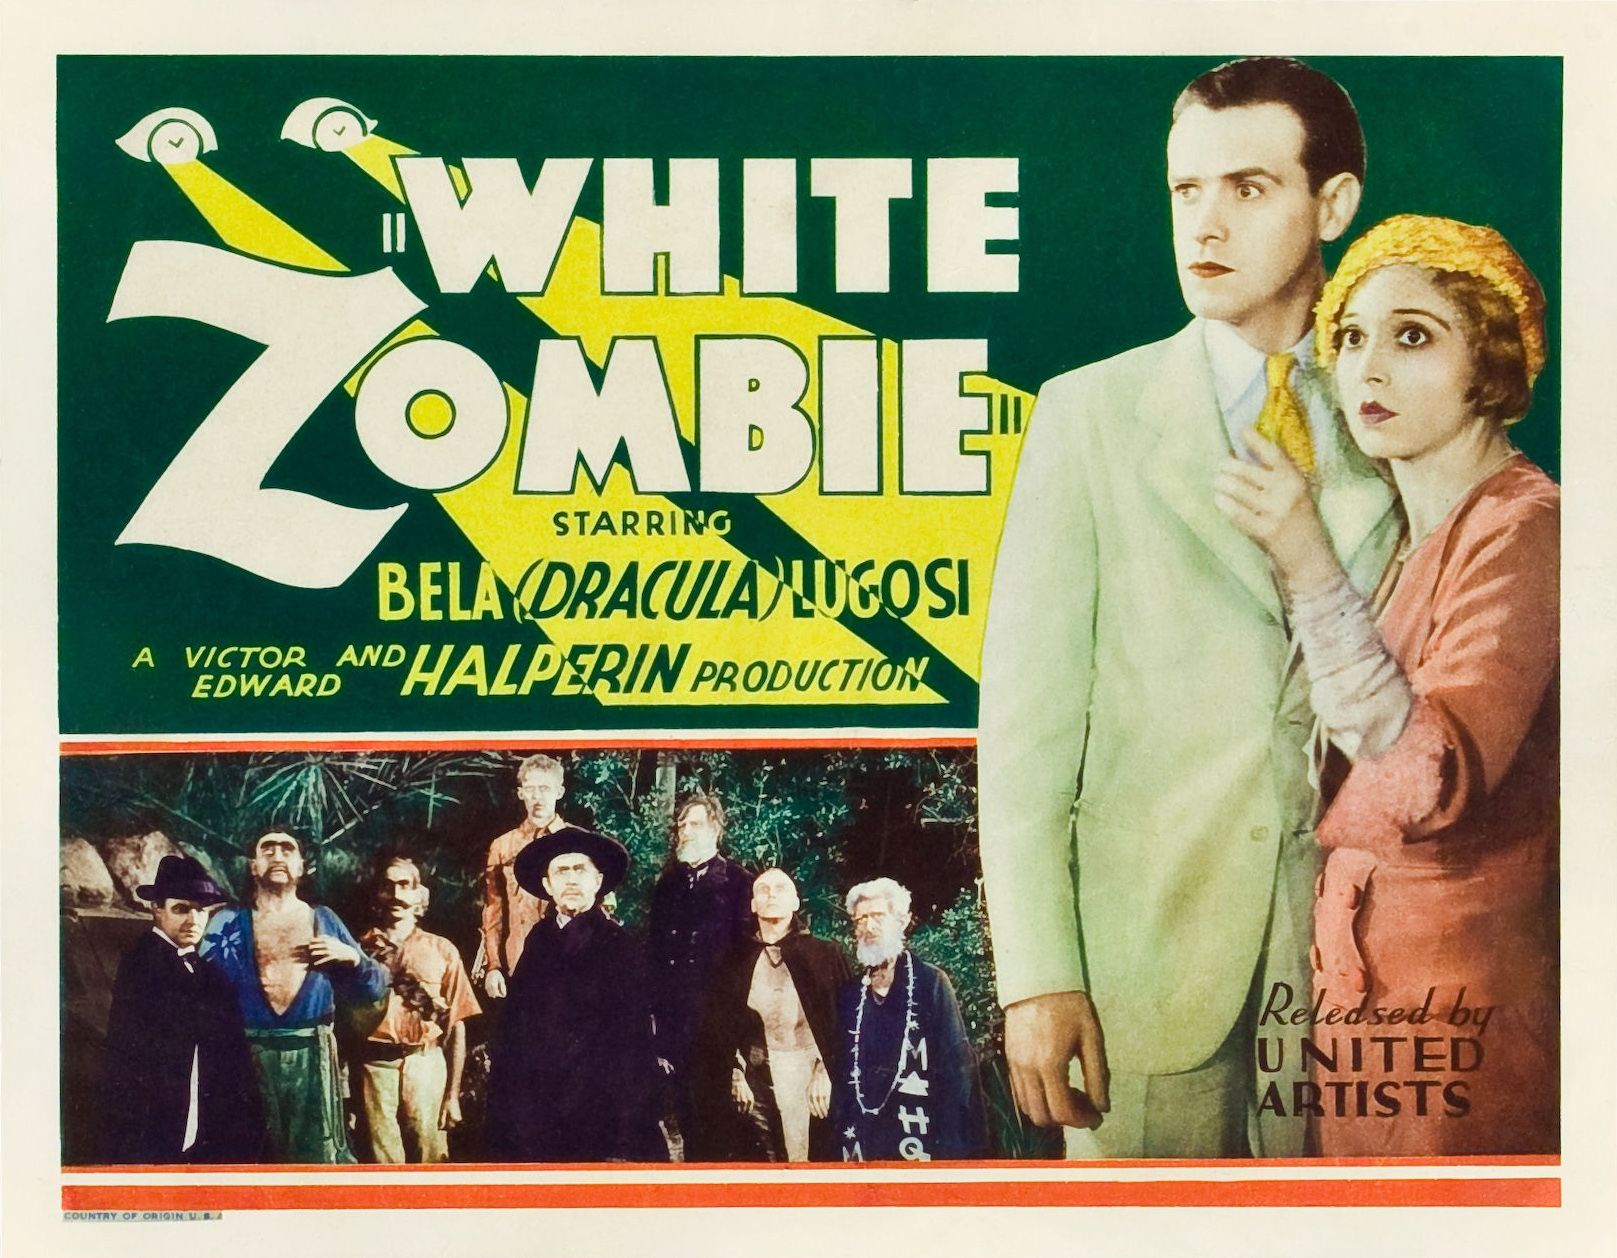 White Zombie is considered the first full-length zombie movie